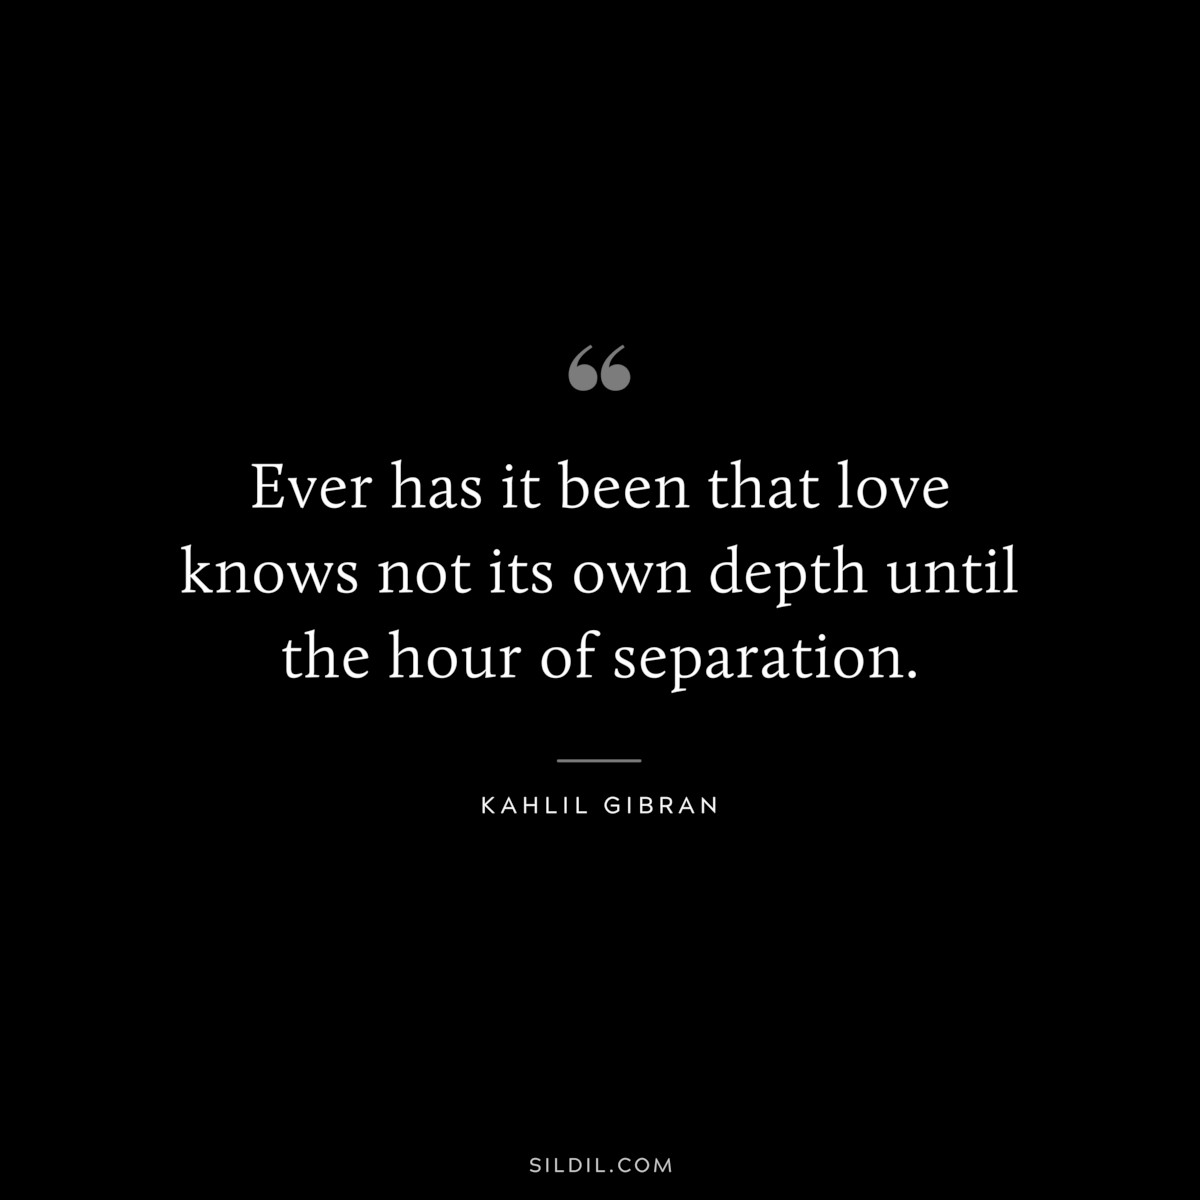 Ever has it been that love knows not its own depth until the hour of separation. ― Kahlil Gibran